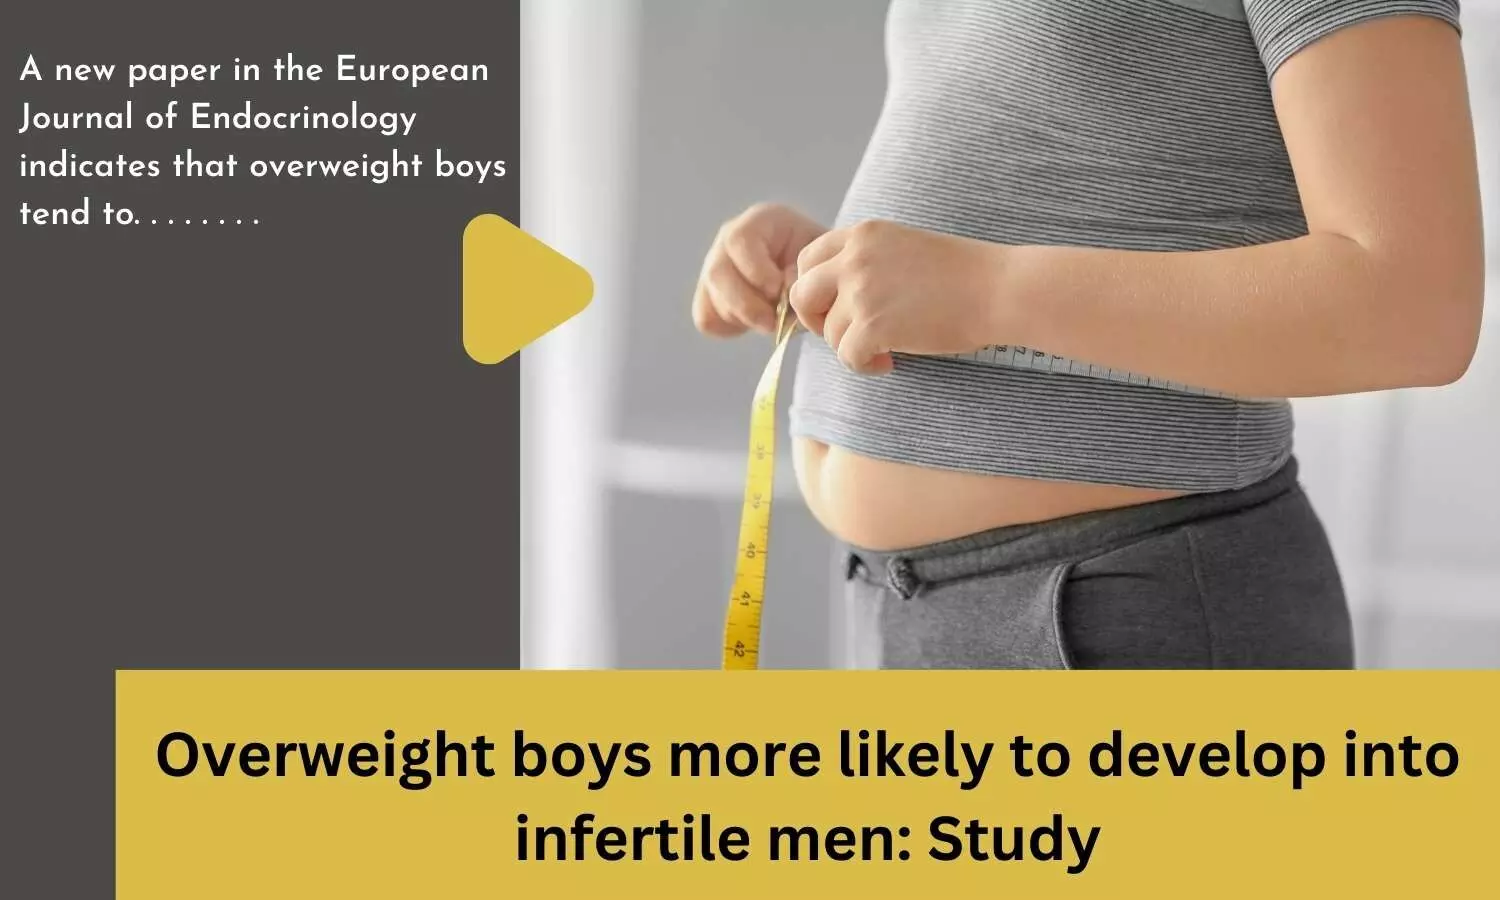 Overweight boys more likely to develop into infertile men: Study